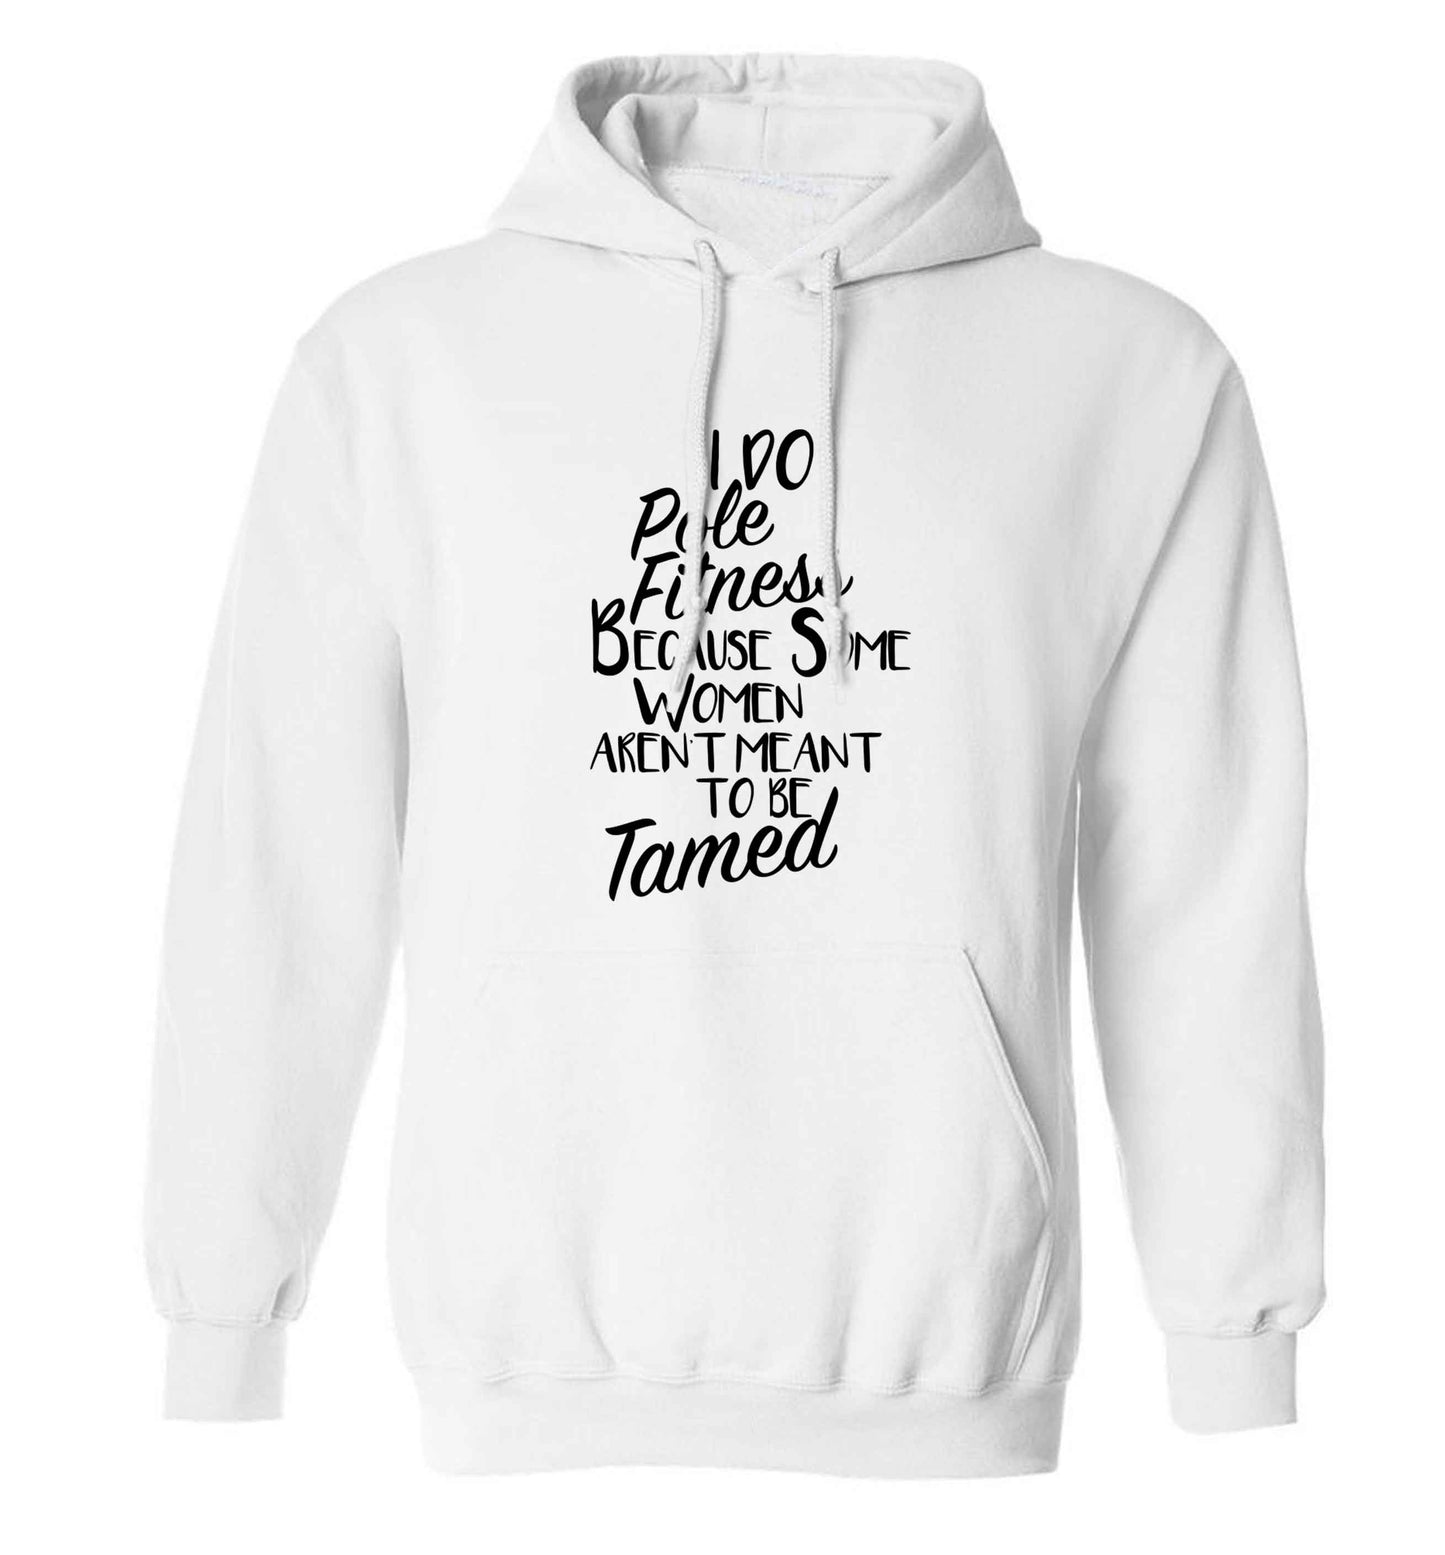 I do pole fitness because some women aren't meant to be tamed adults unisex white hoodie 2XL